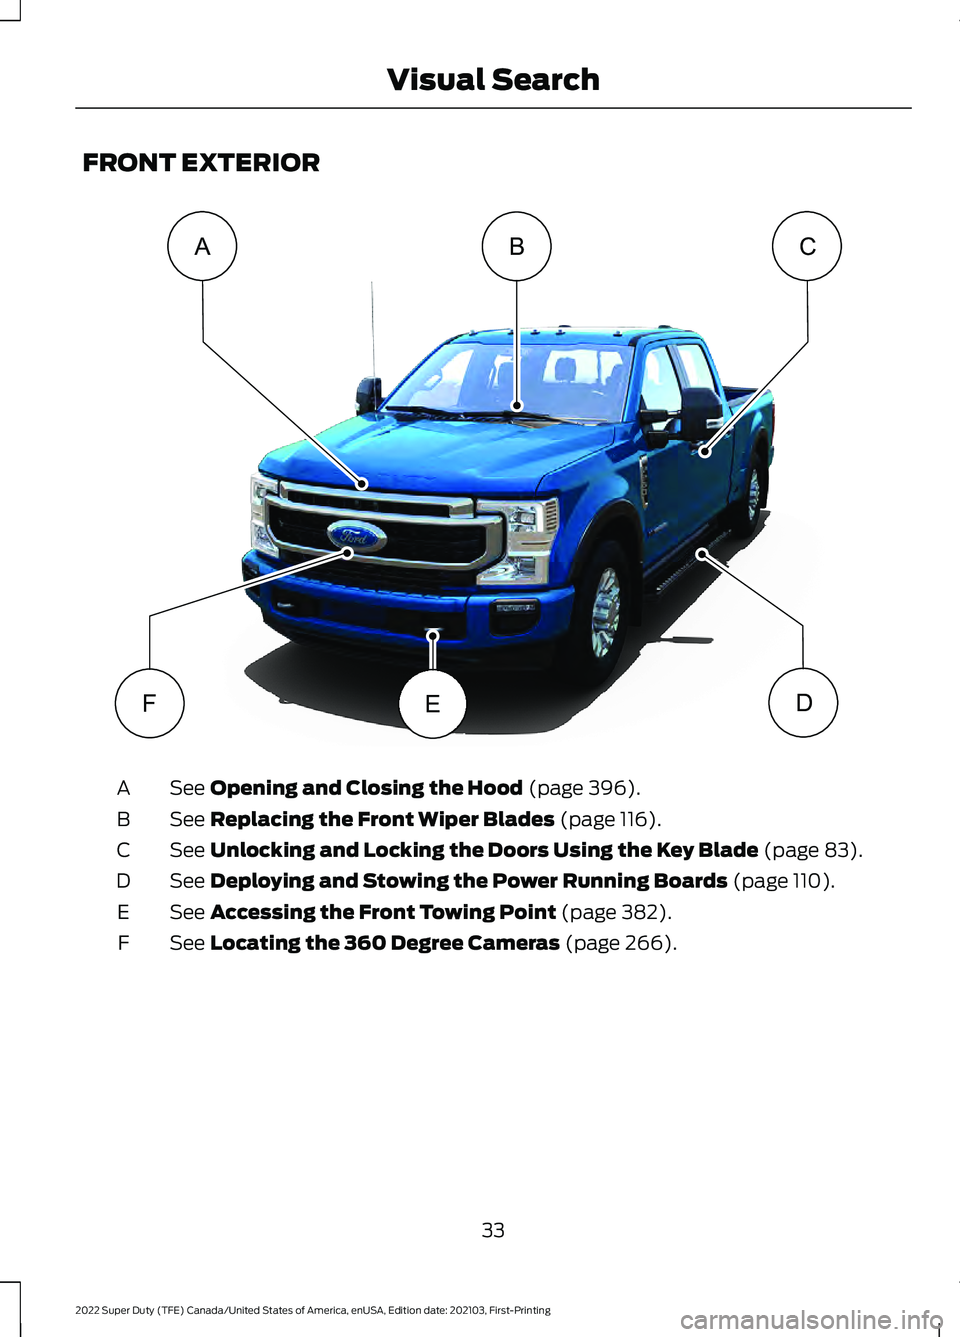 FORD F-600 2022  Owners Manual FRONT EXTERIOR
See Opening and Closing the Hood (page 396).
A
See 
Replacing the Front Wiper Blades (page 116).
B
See 
Unlocking and Locking the Doors Using the Key Blade (page 83).
C
See 
Deploying a